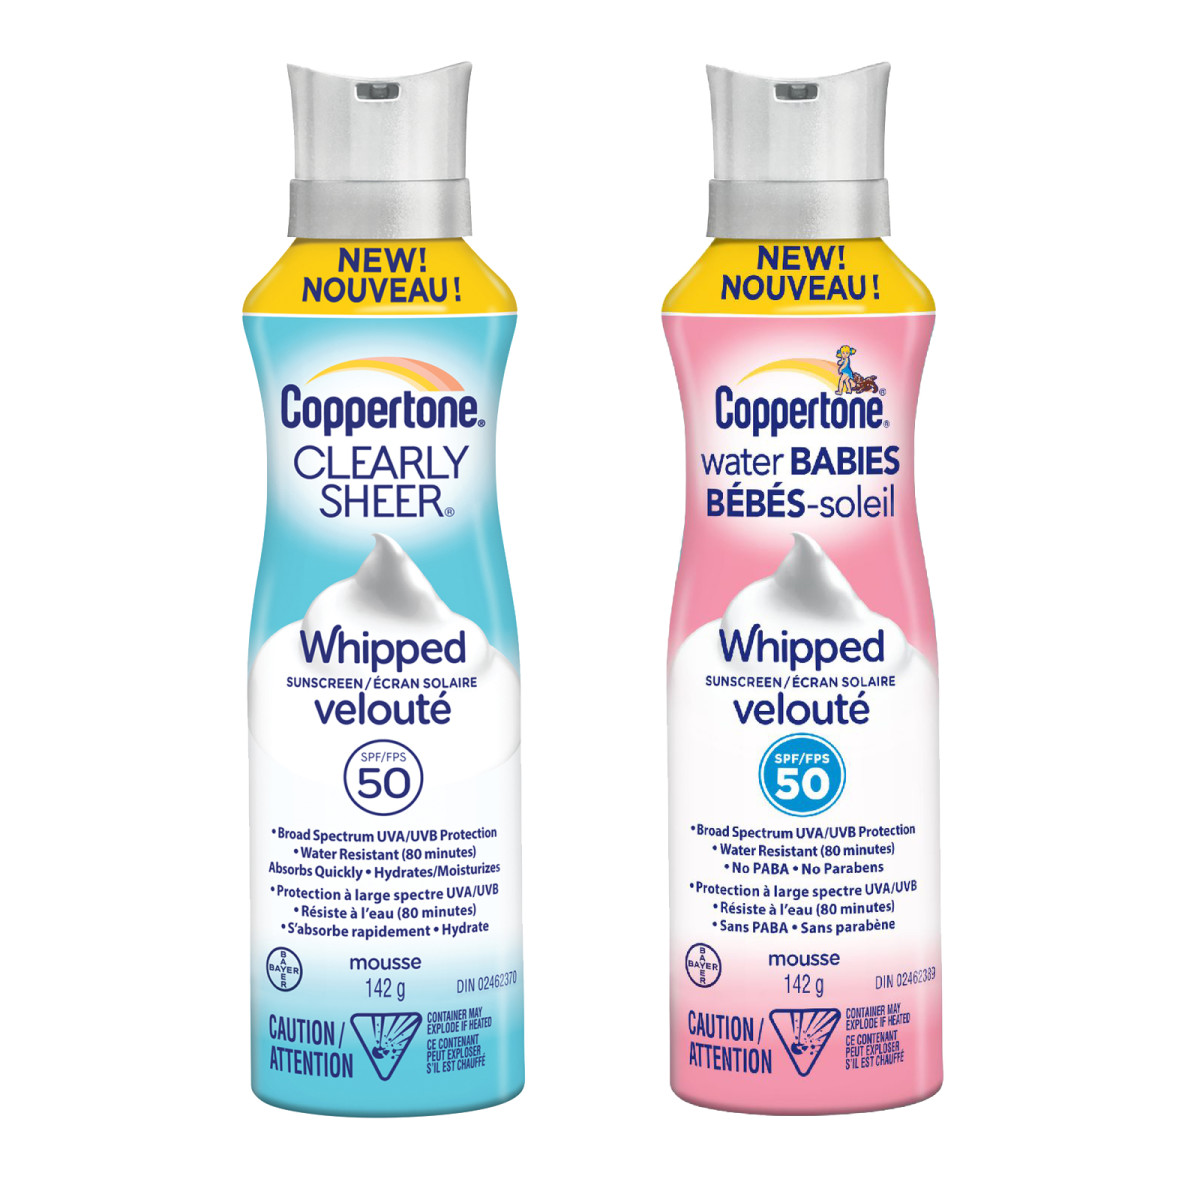 Coppertone Whipped Sunscreens SPF 50: Clearly Sheer Whipped and Water Babies Whipped (for kids; fragrance-free)